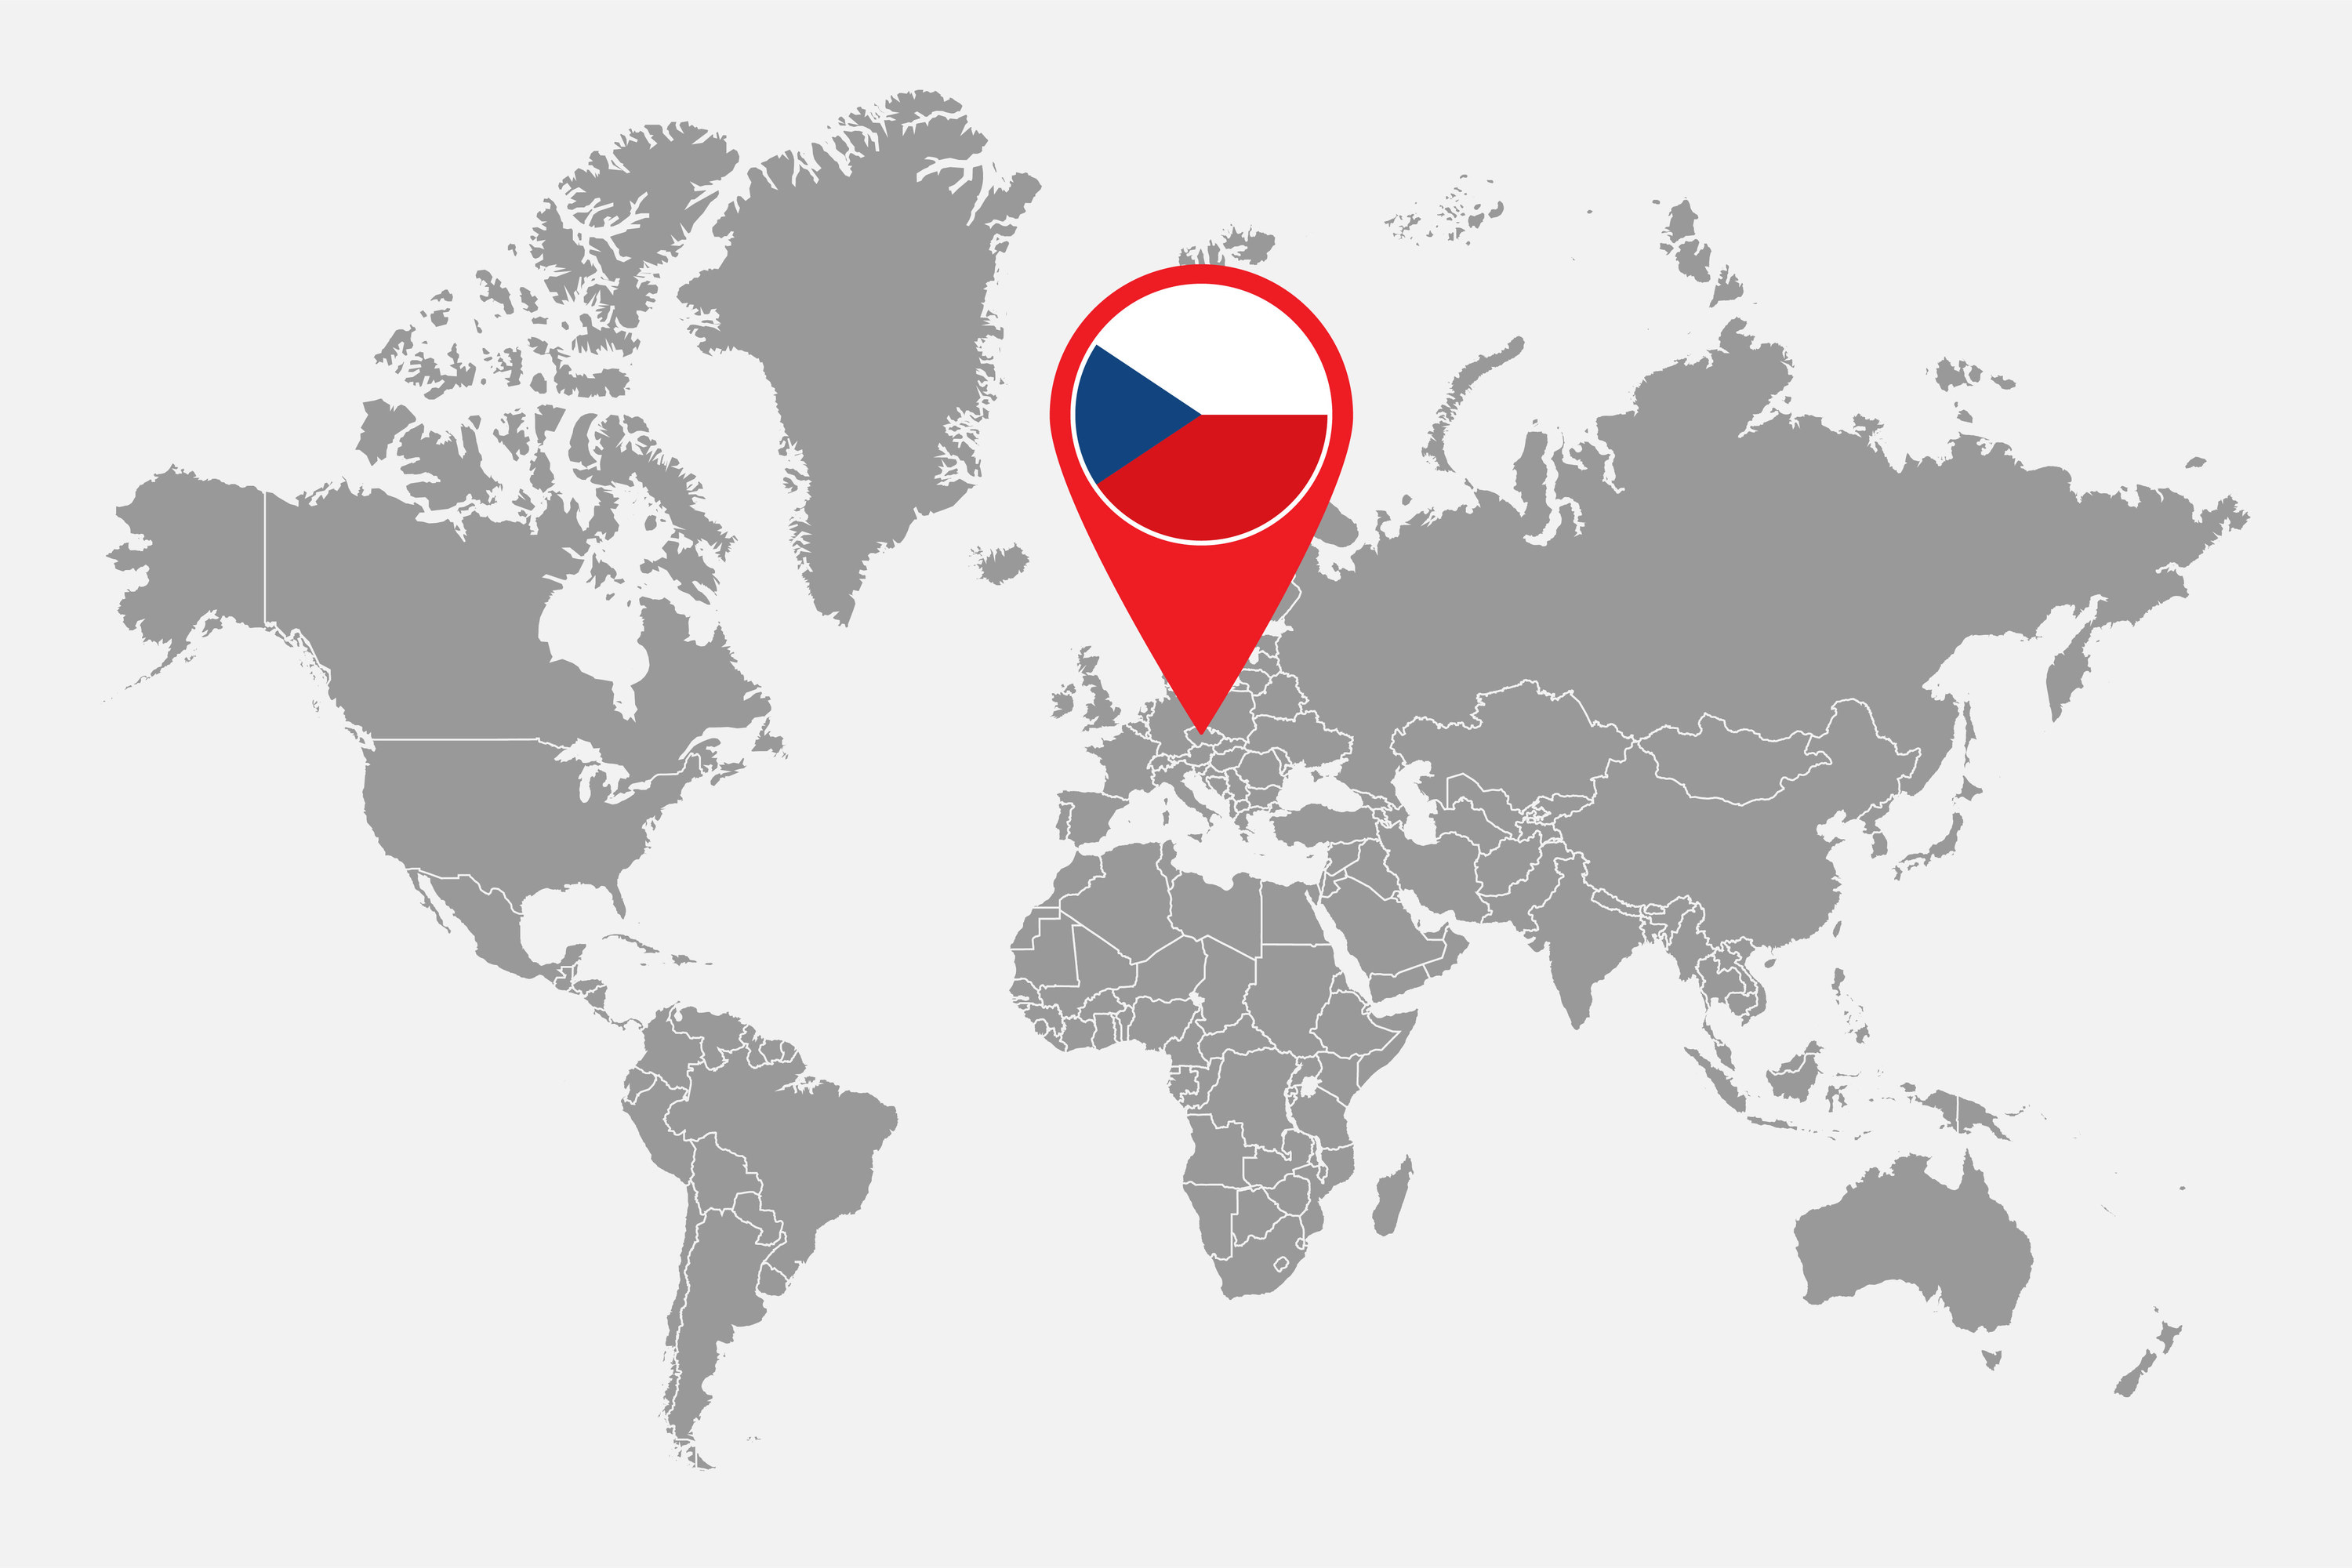 A world map with the Czech Republic indicated